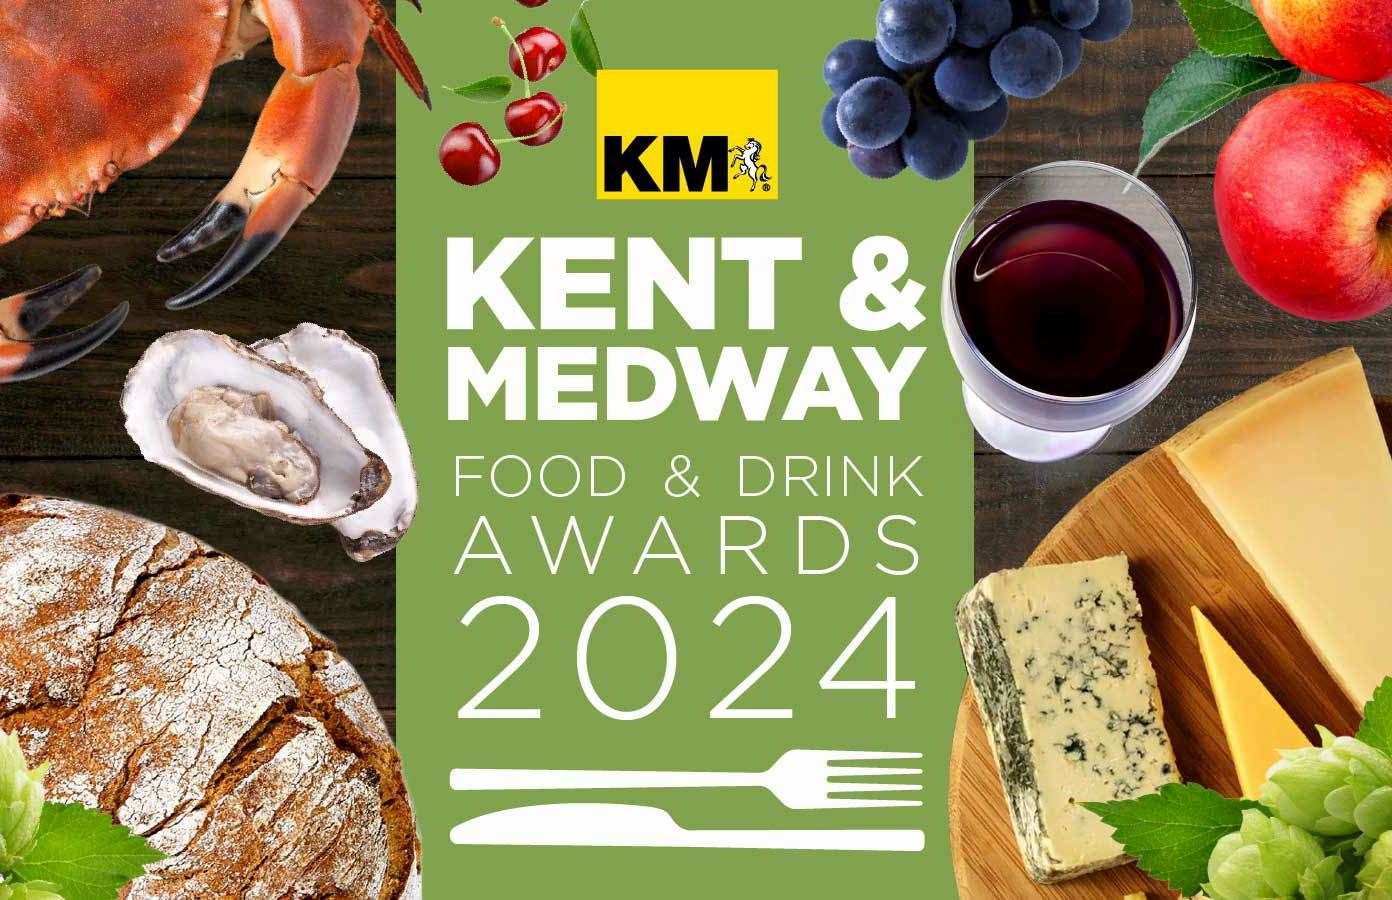 Make sure you get your nominations in for the Kent & Medway Food & Drink Awards and be in with a chance of winning £100